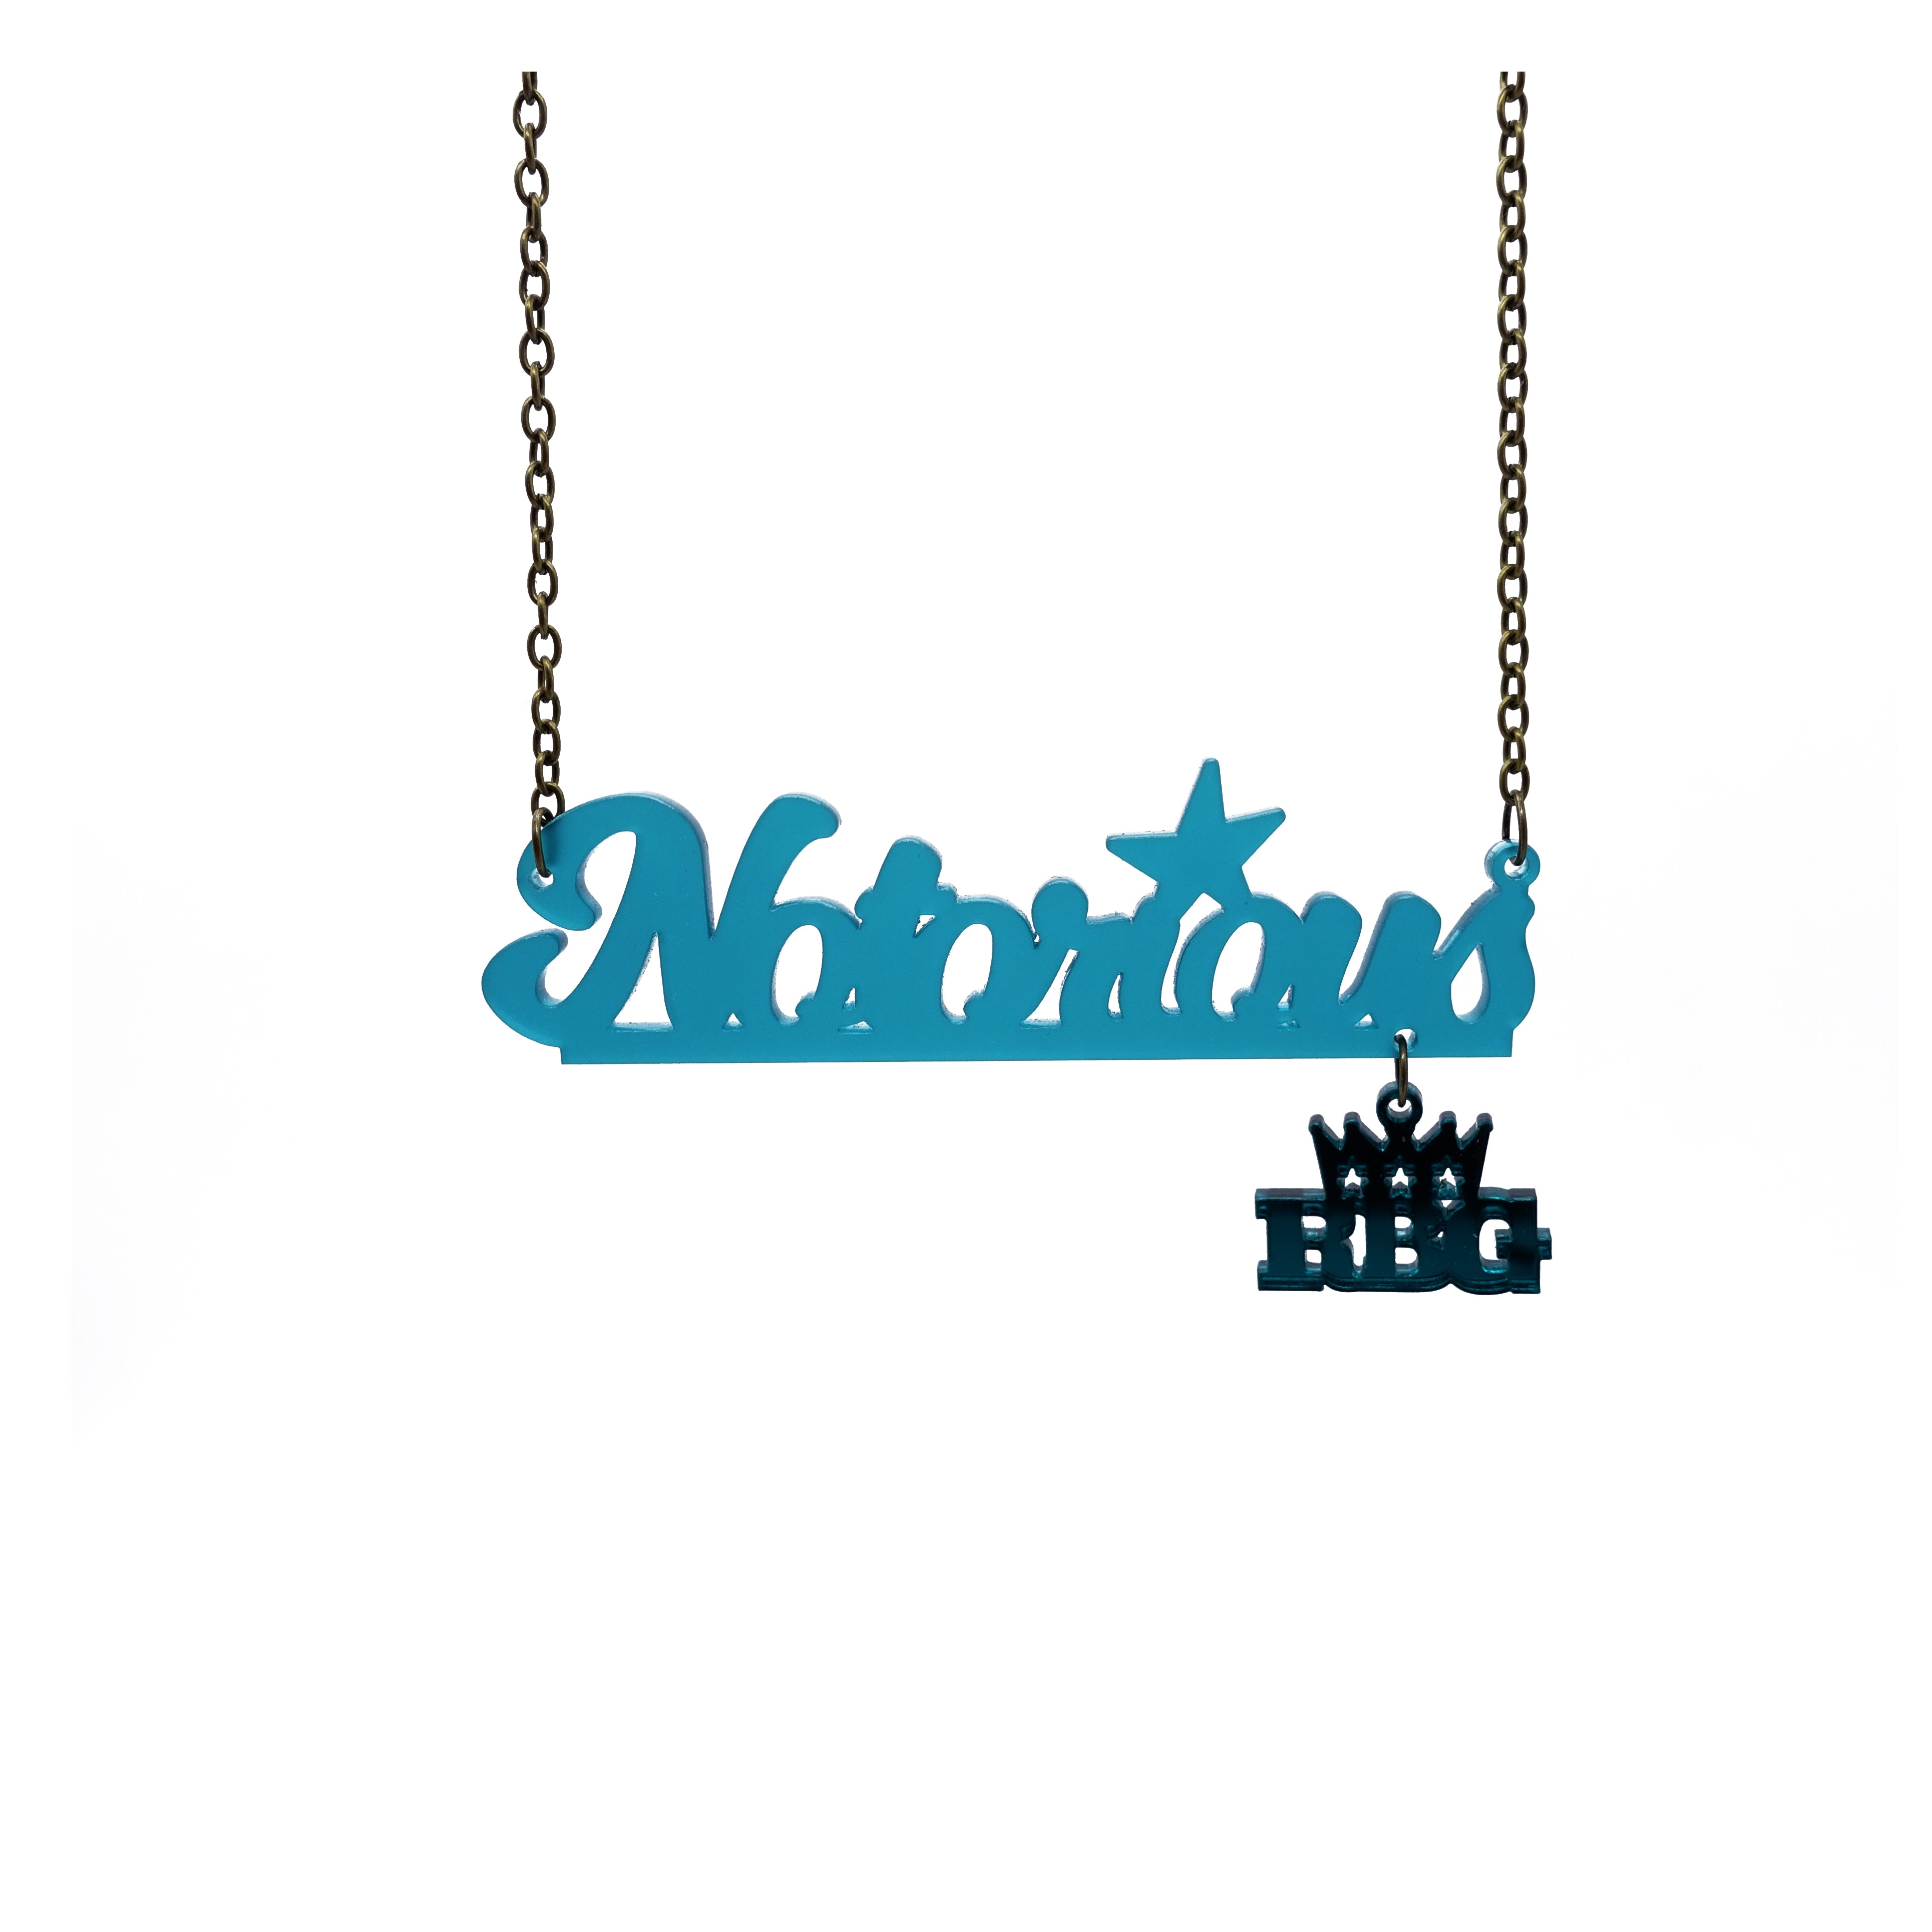 Notorious RBG necklace in teal frost in honour of Ruth Bader Ginsburg